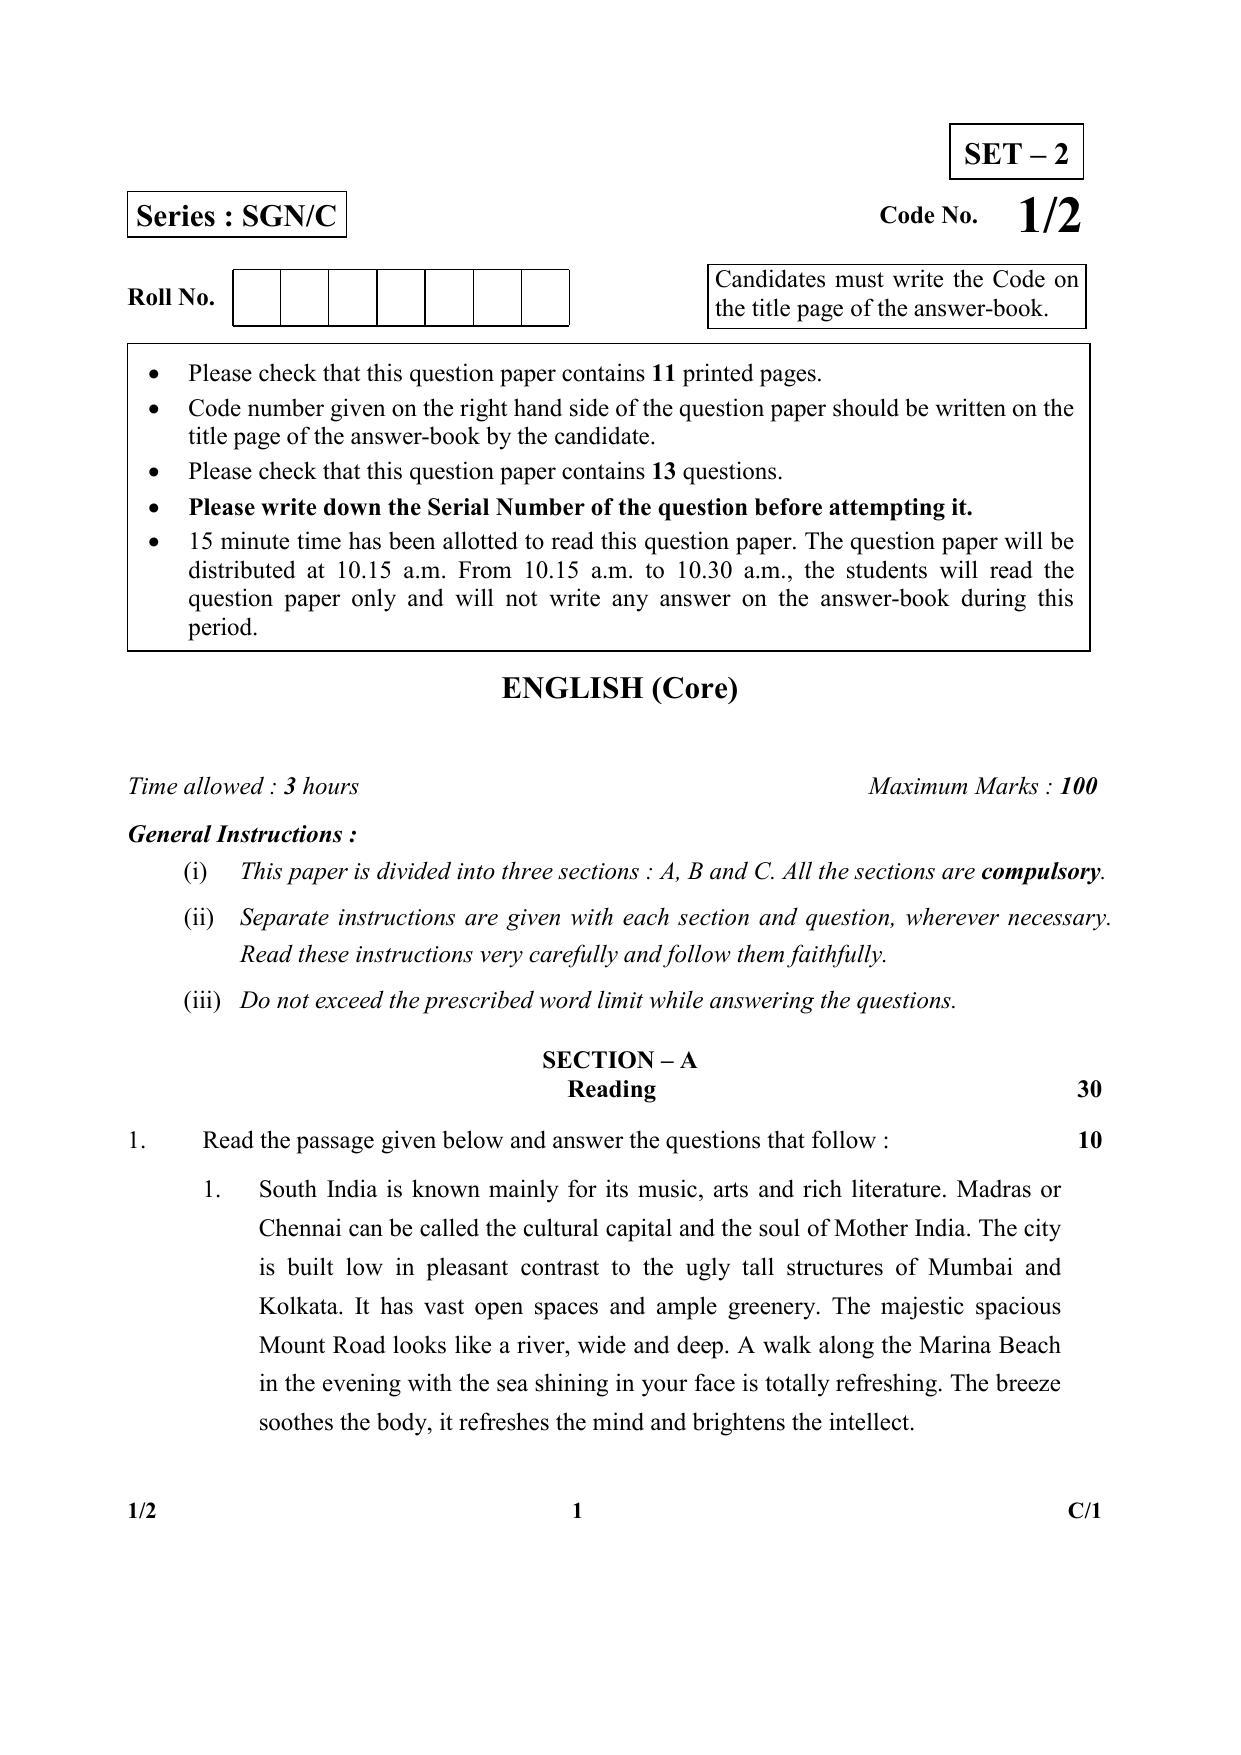 CBSE Class 12 1-2(English Core) 2018 Compartment Question Paper - Page 1